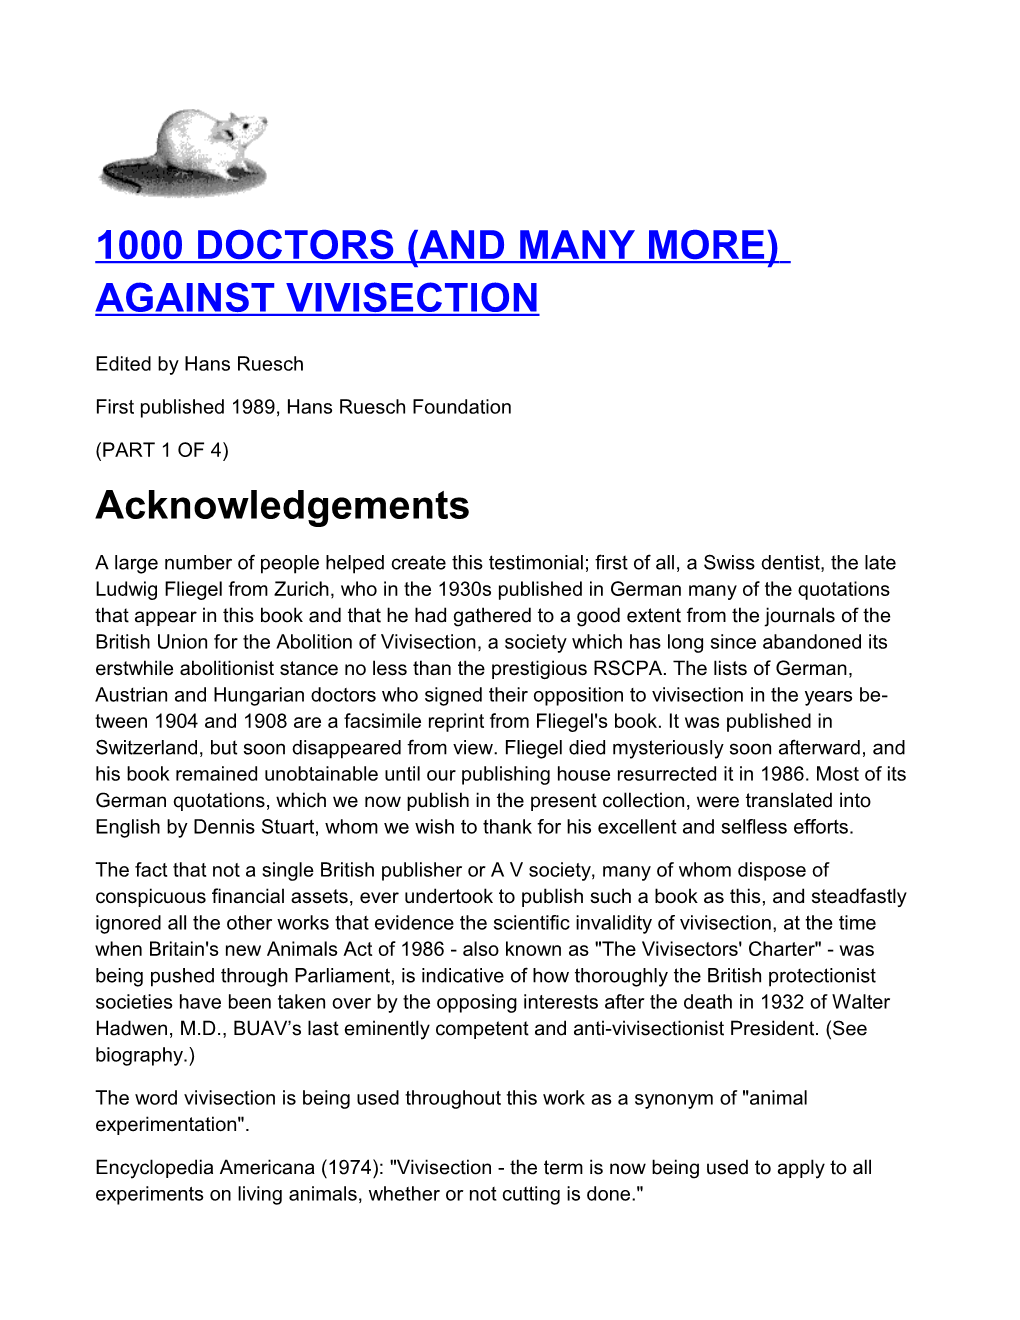 1000 Doctors (And Many More) Against Vivisection